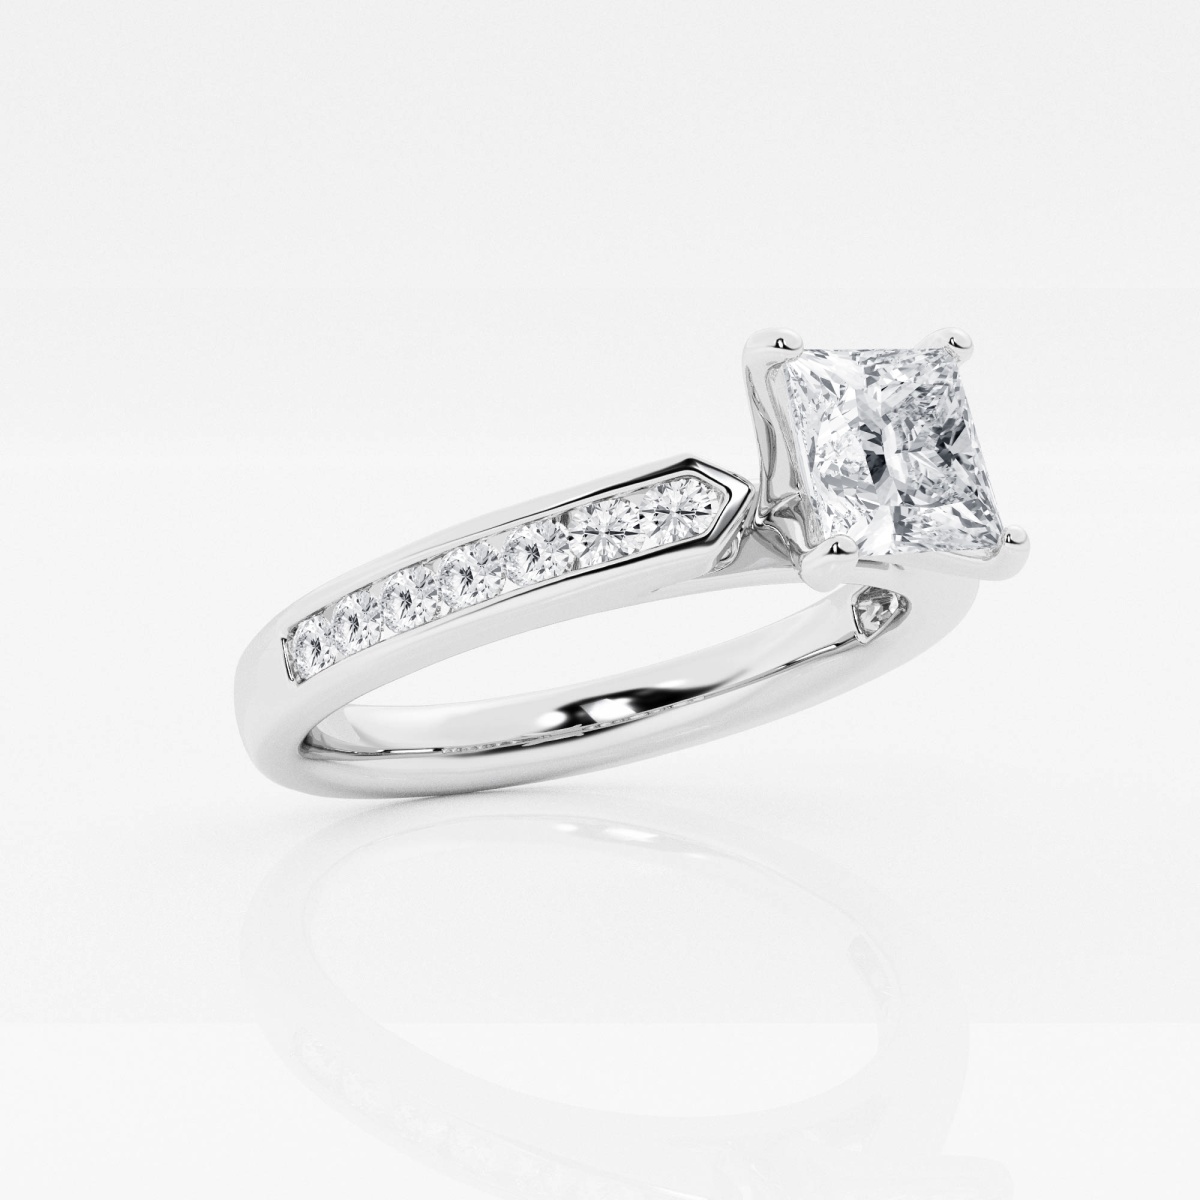 Additional Image 1 for  1 1/4 ctw Princess Lab Grown Diamond Engagement Ring with Channel Set Side Accents